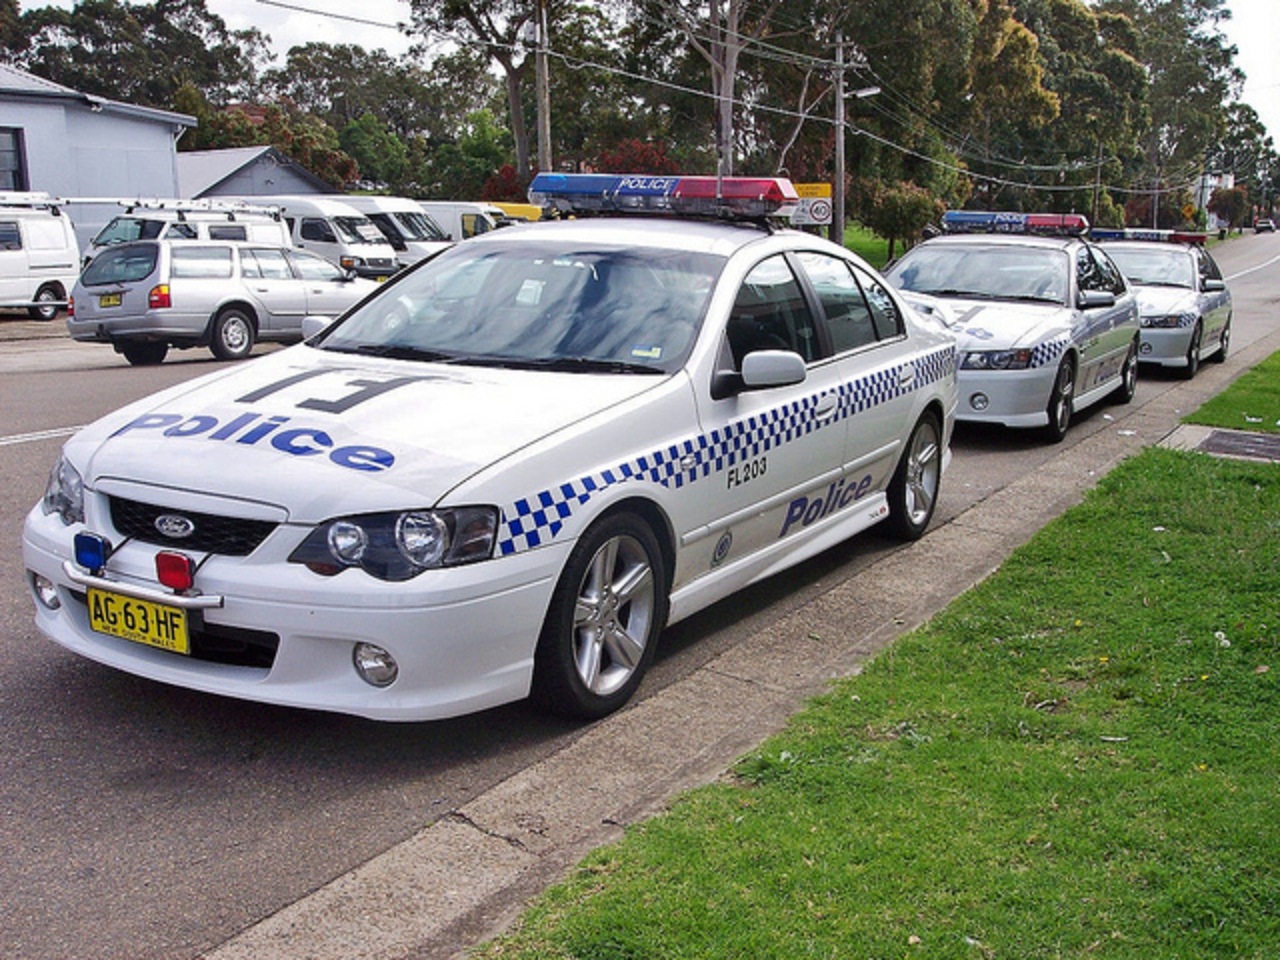 2005 Ford BA Mk II Falcon XR8 & 2004 Holden VZ Commodore SS - NSW ...